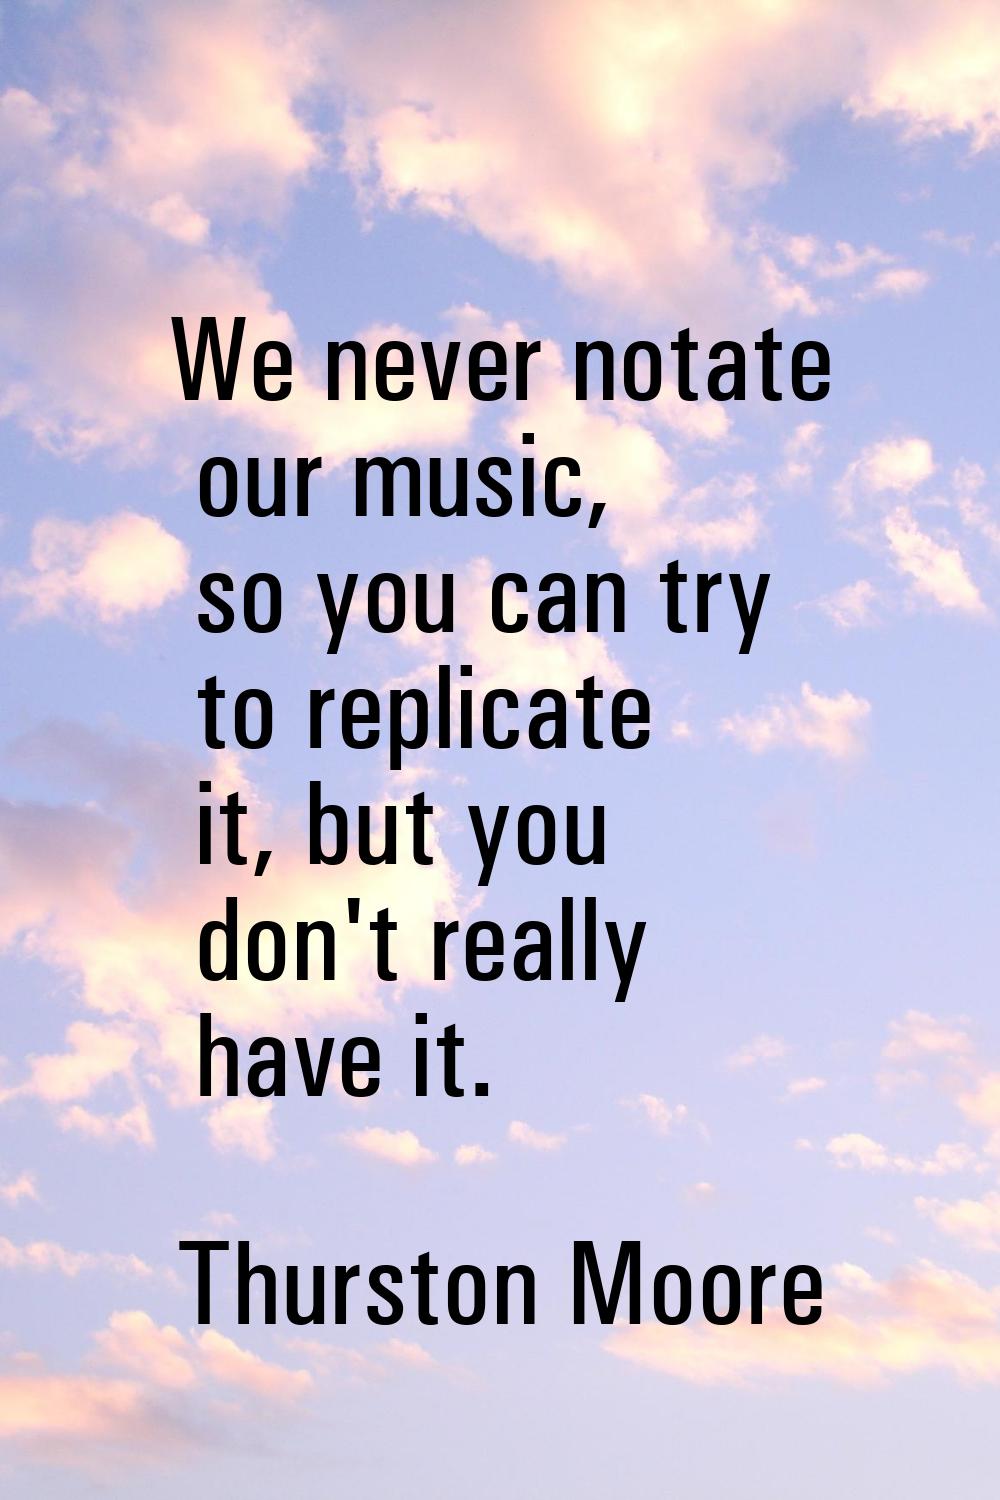 We never notate our music, so you can try to replicate it, but you don't really have it.